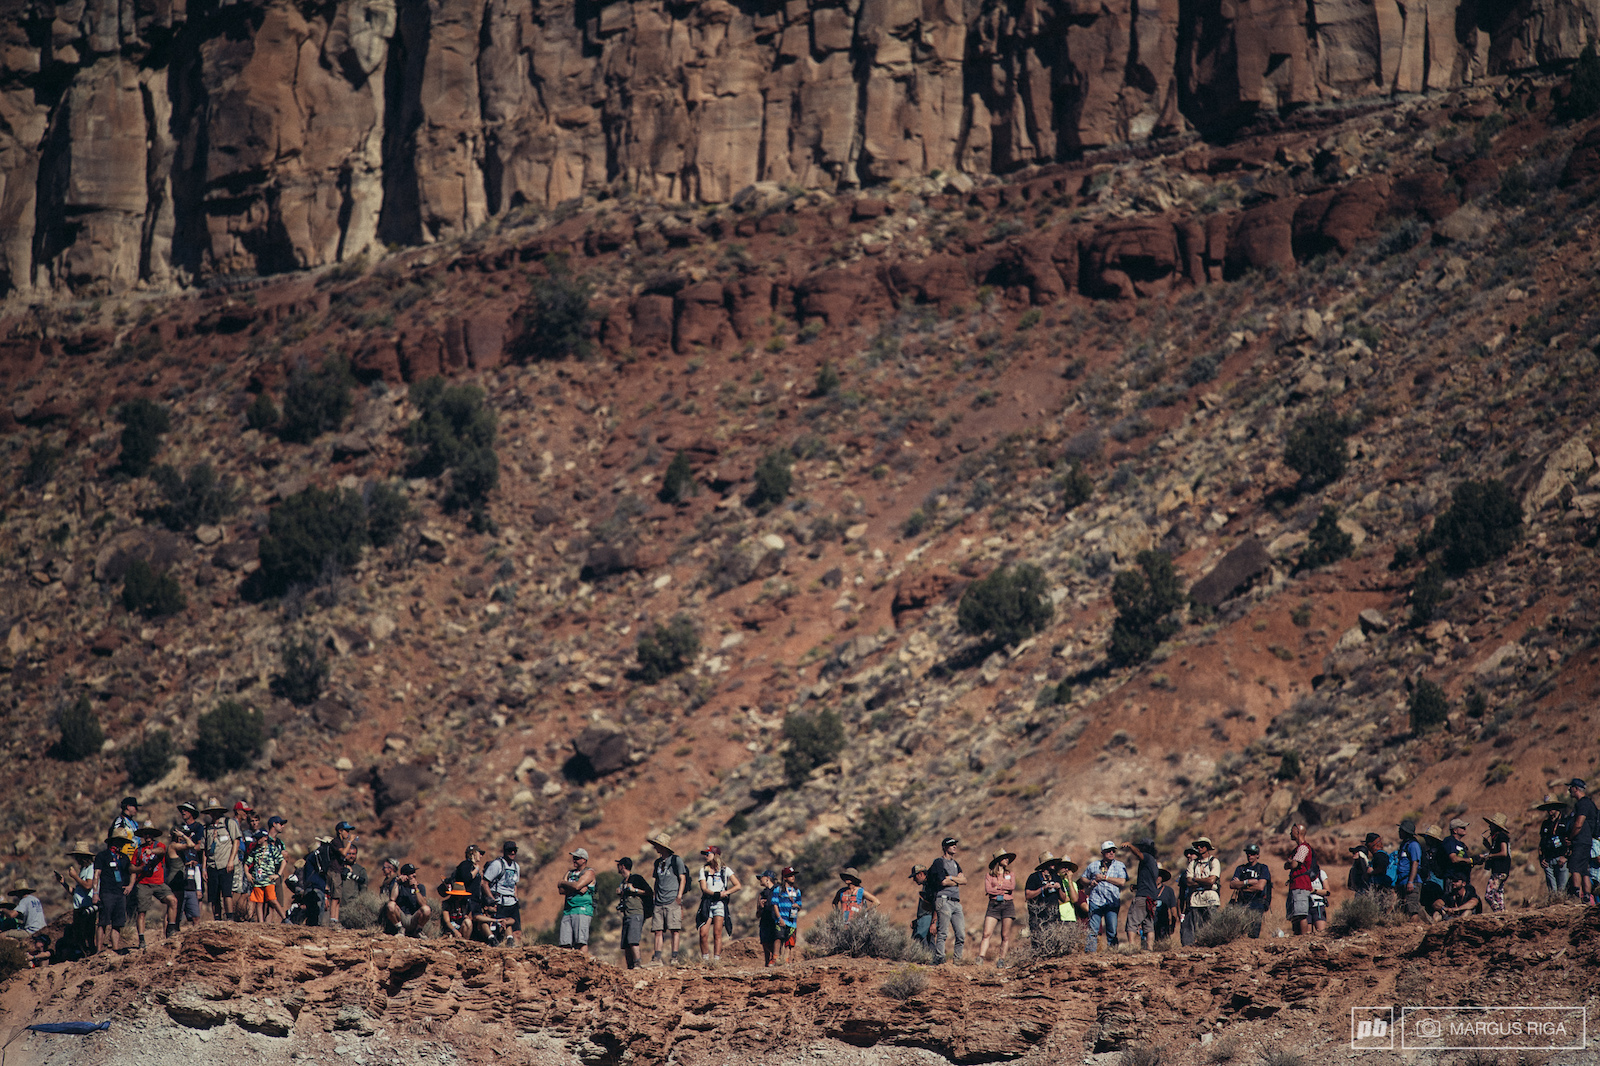 2017 Red Bull Rampage